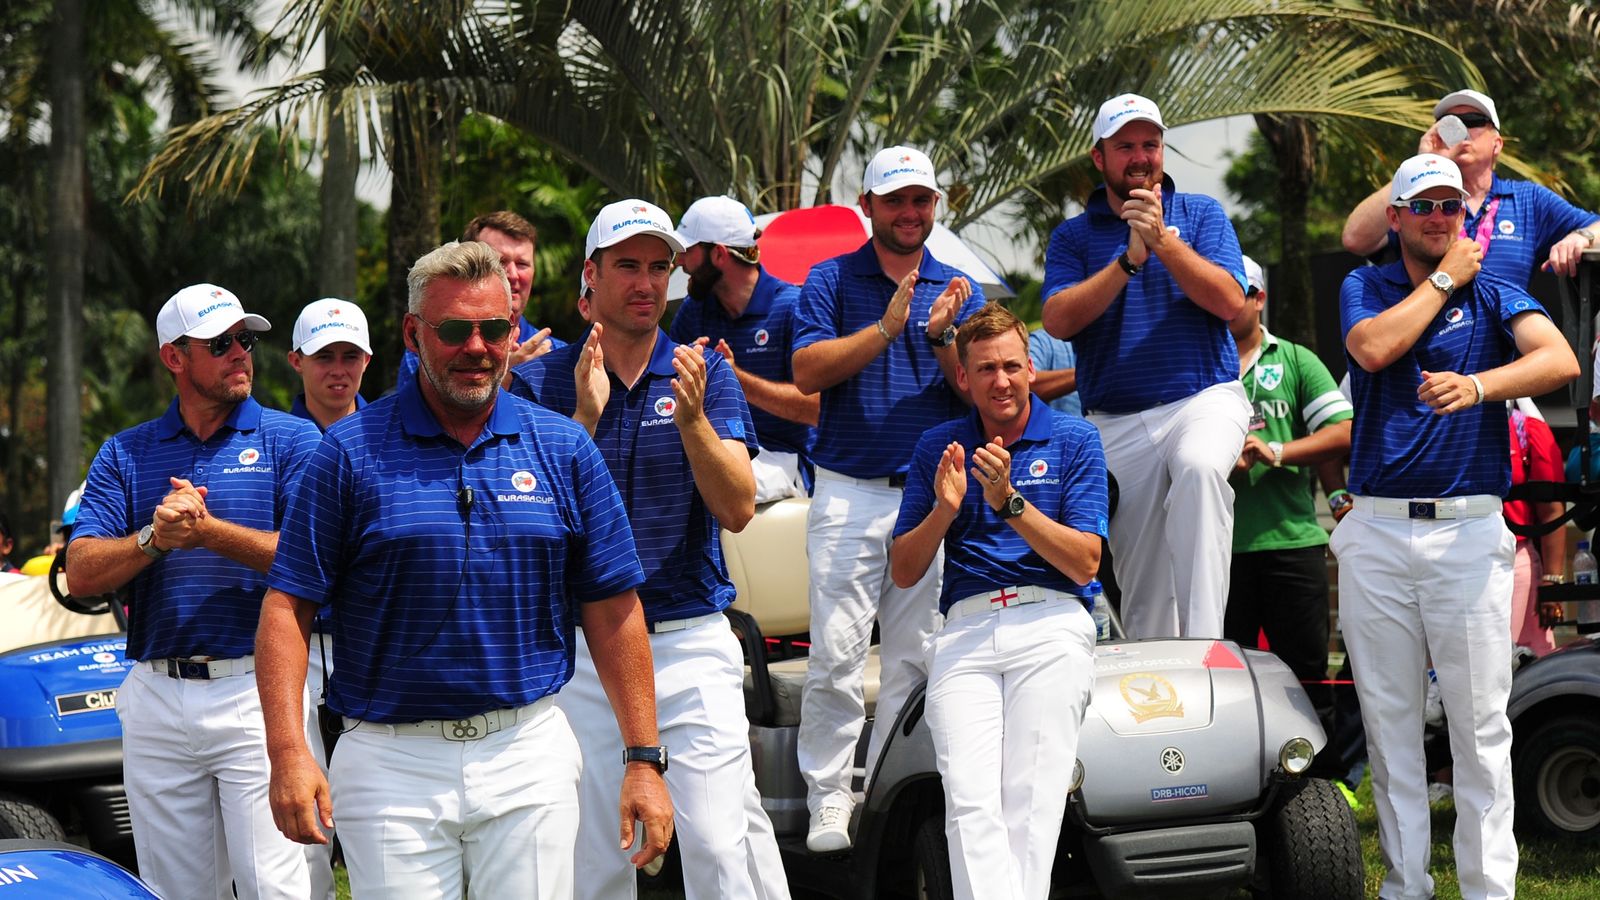 Europe's EurAsia Cup team named European Tour Golfer of the Month